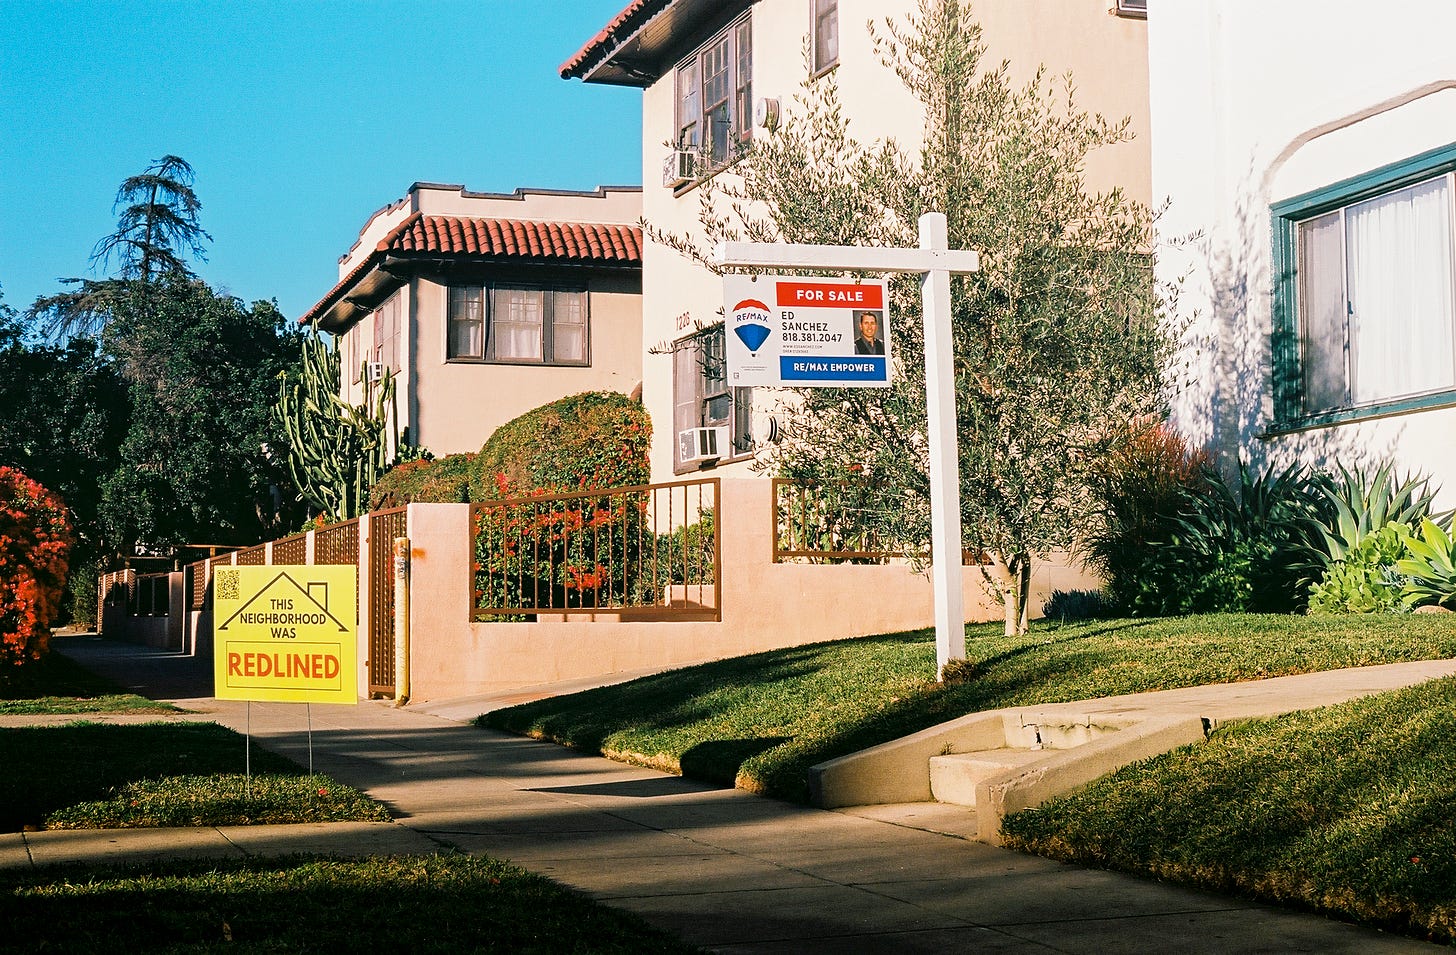 Photo of a yellow redlining yard sign planted in the grass in front of an apartment building that has a for sale sign on it.